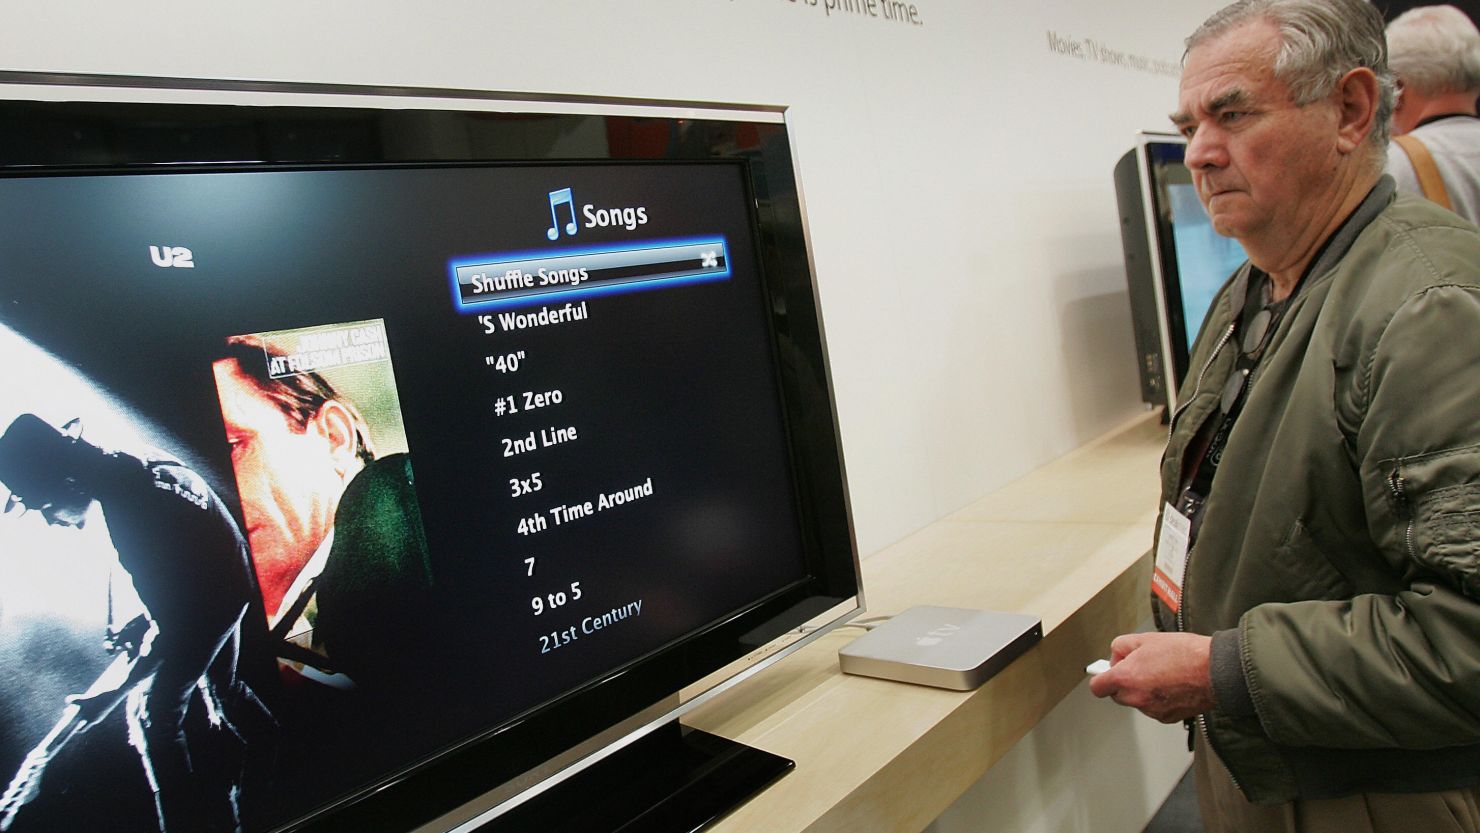 Apple's Web-TV device has underperformed, but a full TV may be on the way.